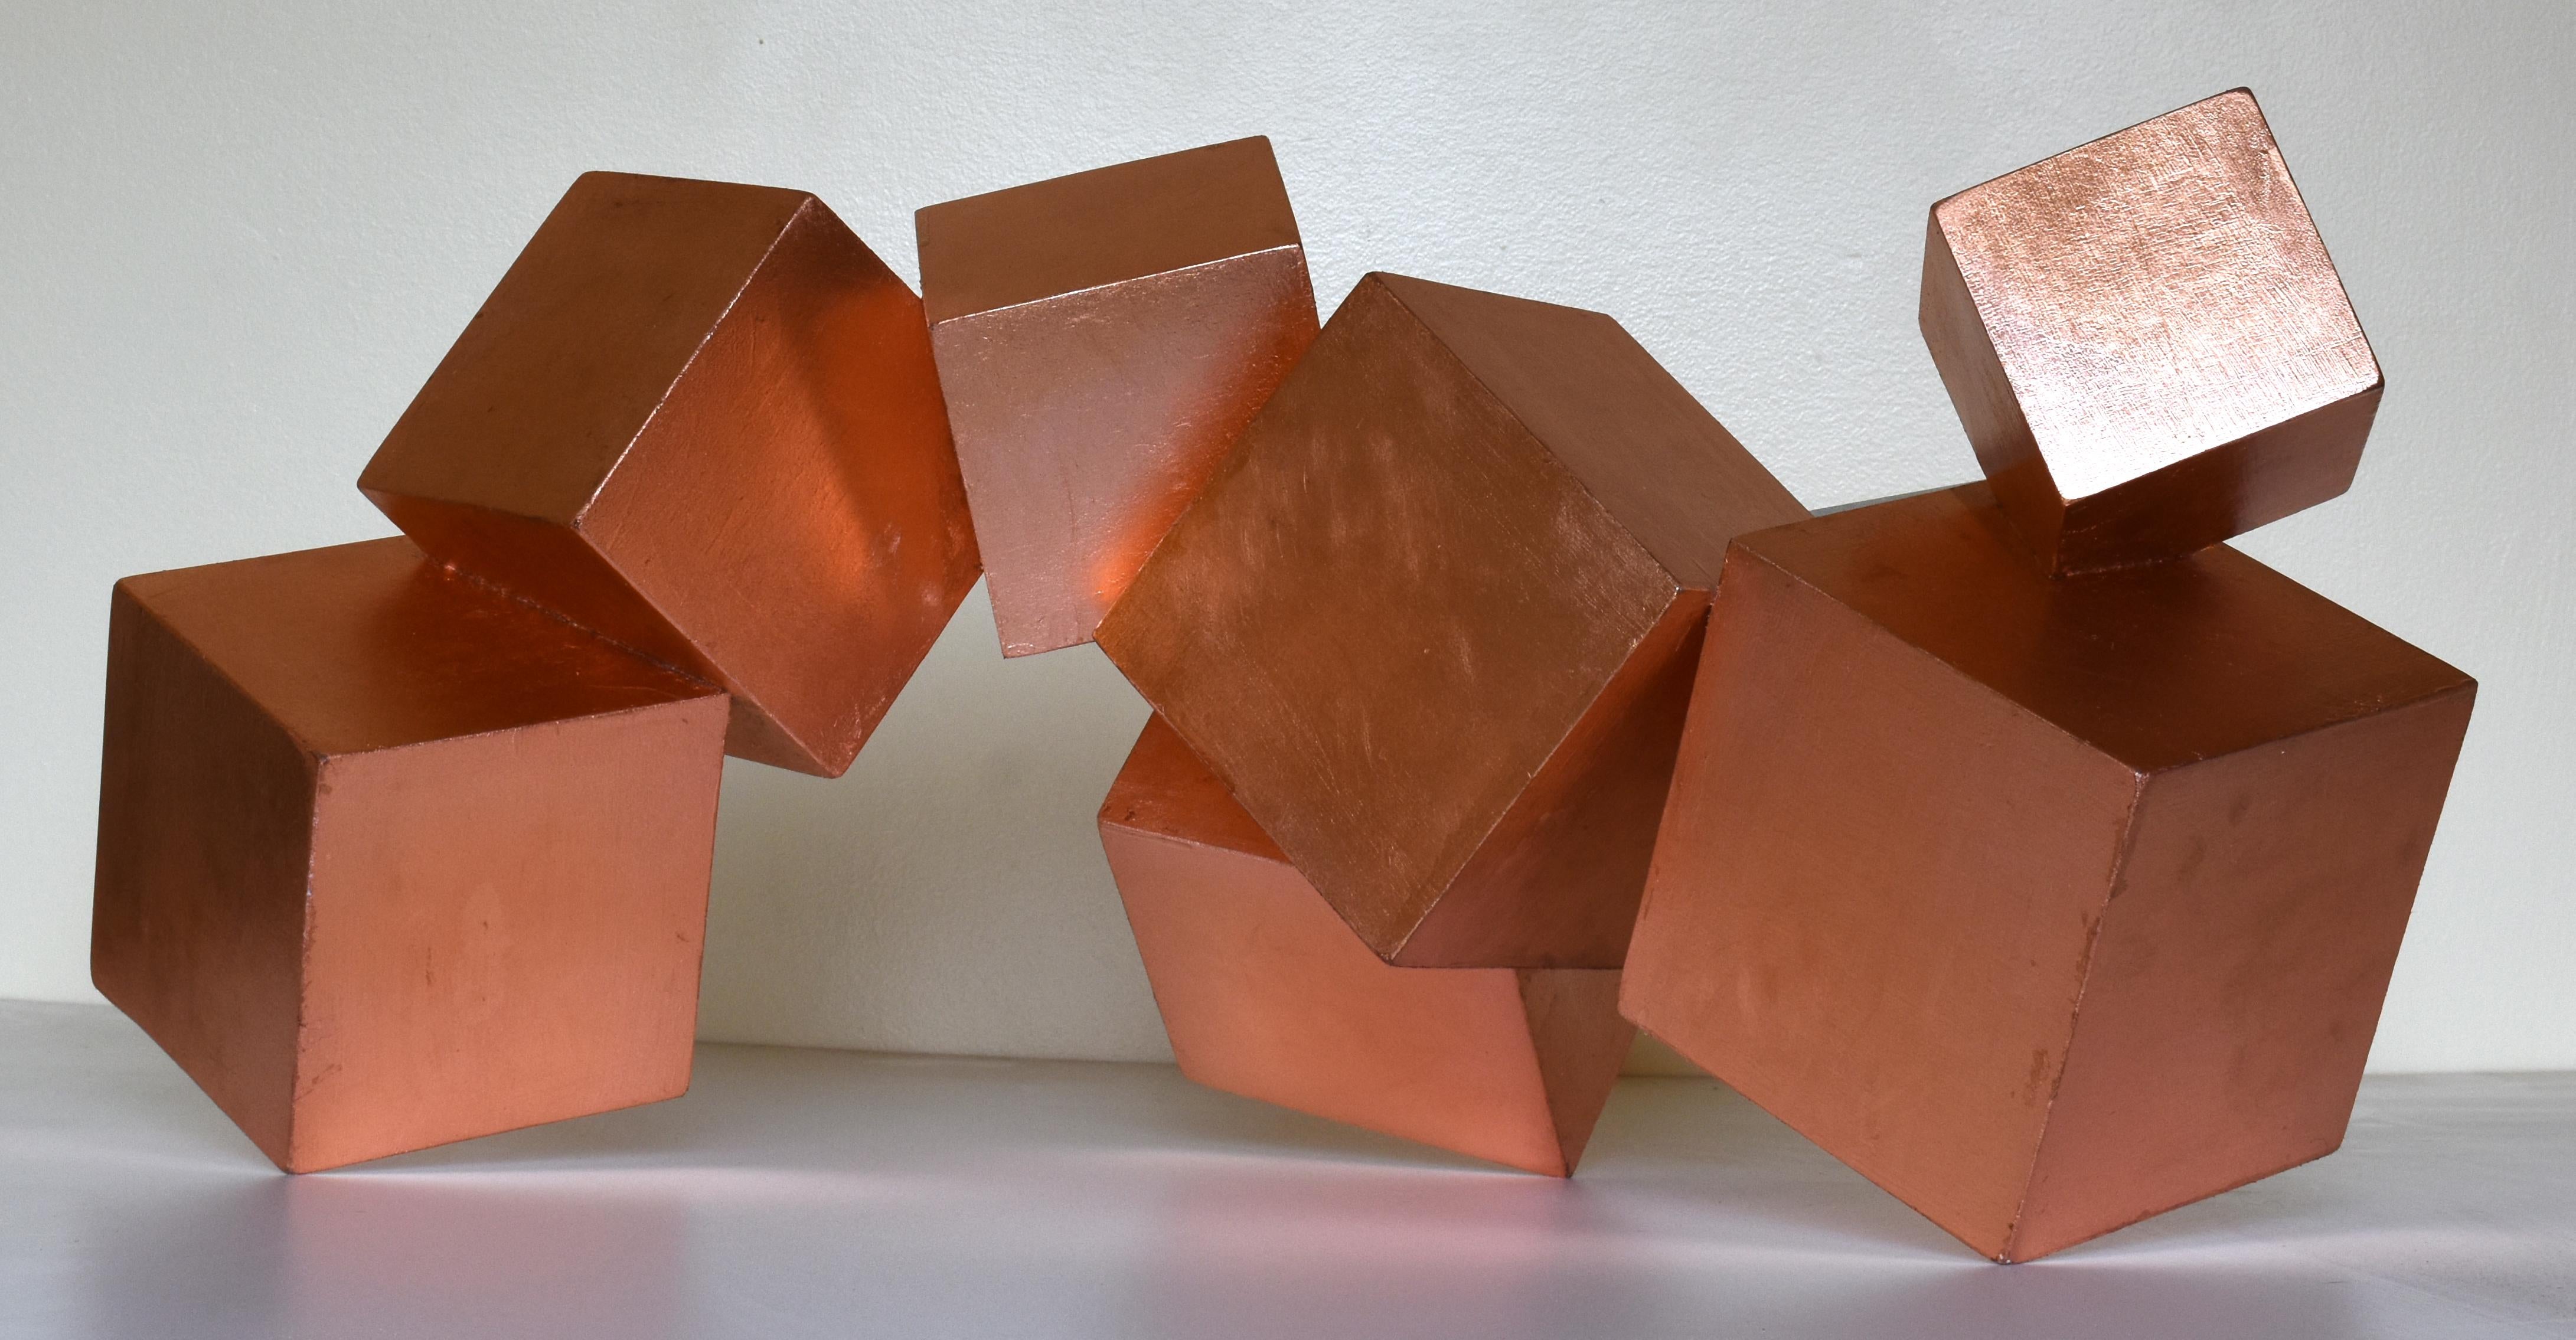 Copper and Mahogany Pyrite (exotic wood, metallic, cubic, table top sculpture) - Brown Abstract Sculpture by Chloe Hedden